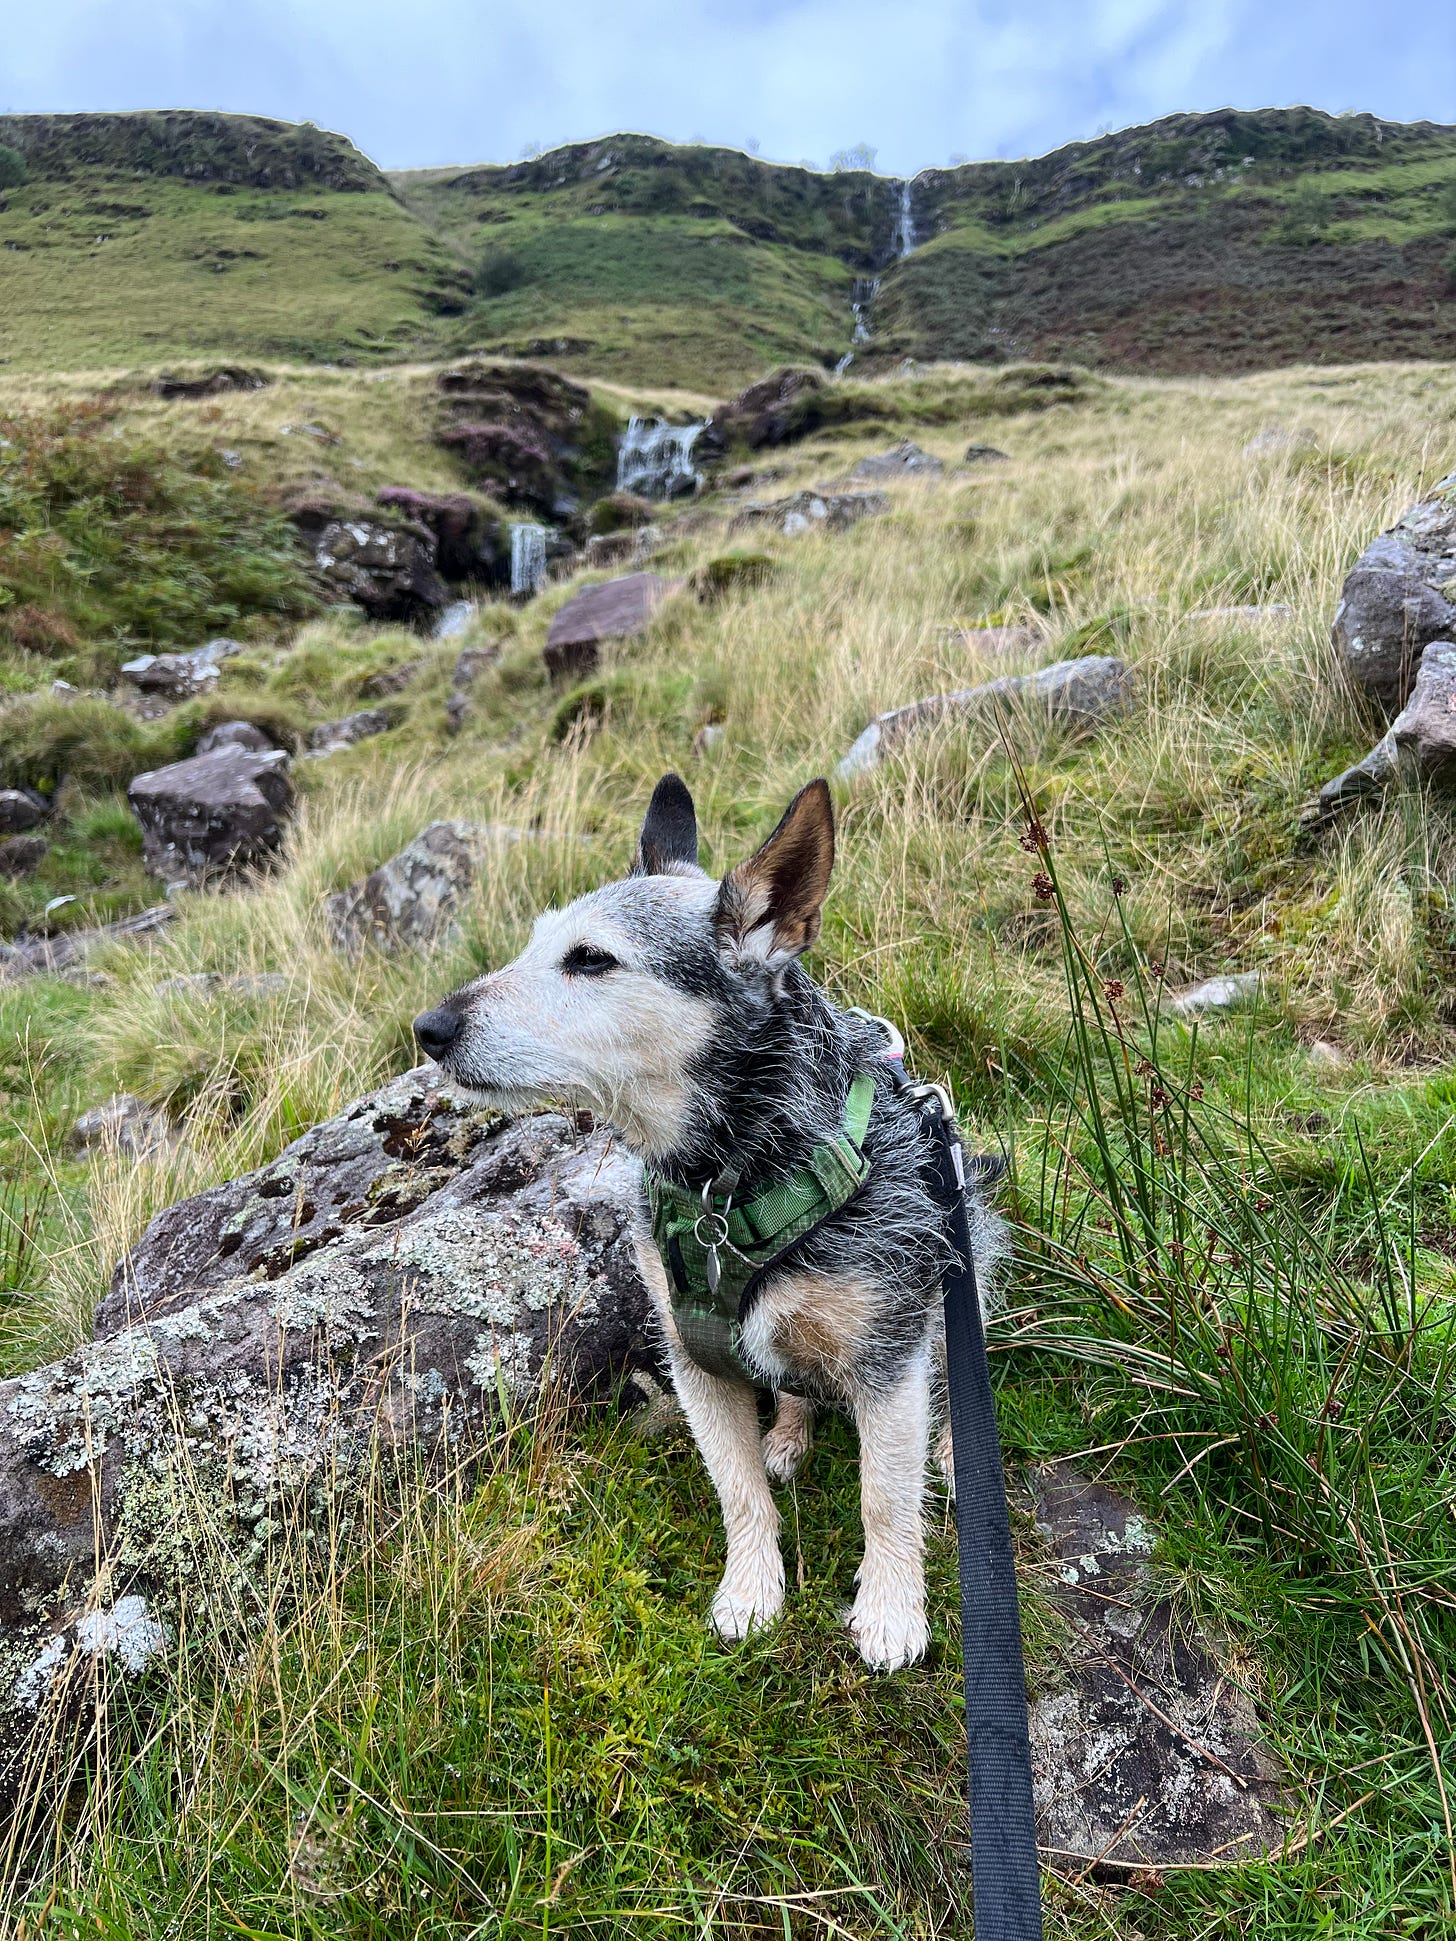 The most handsome dog in the universe sits by the bank of a stream cascading down the mountainside